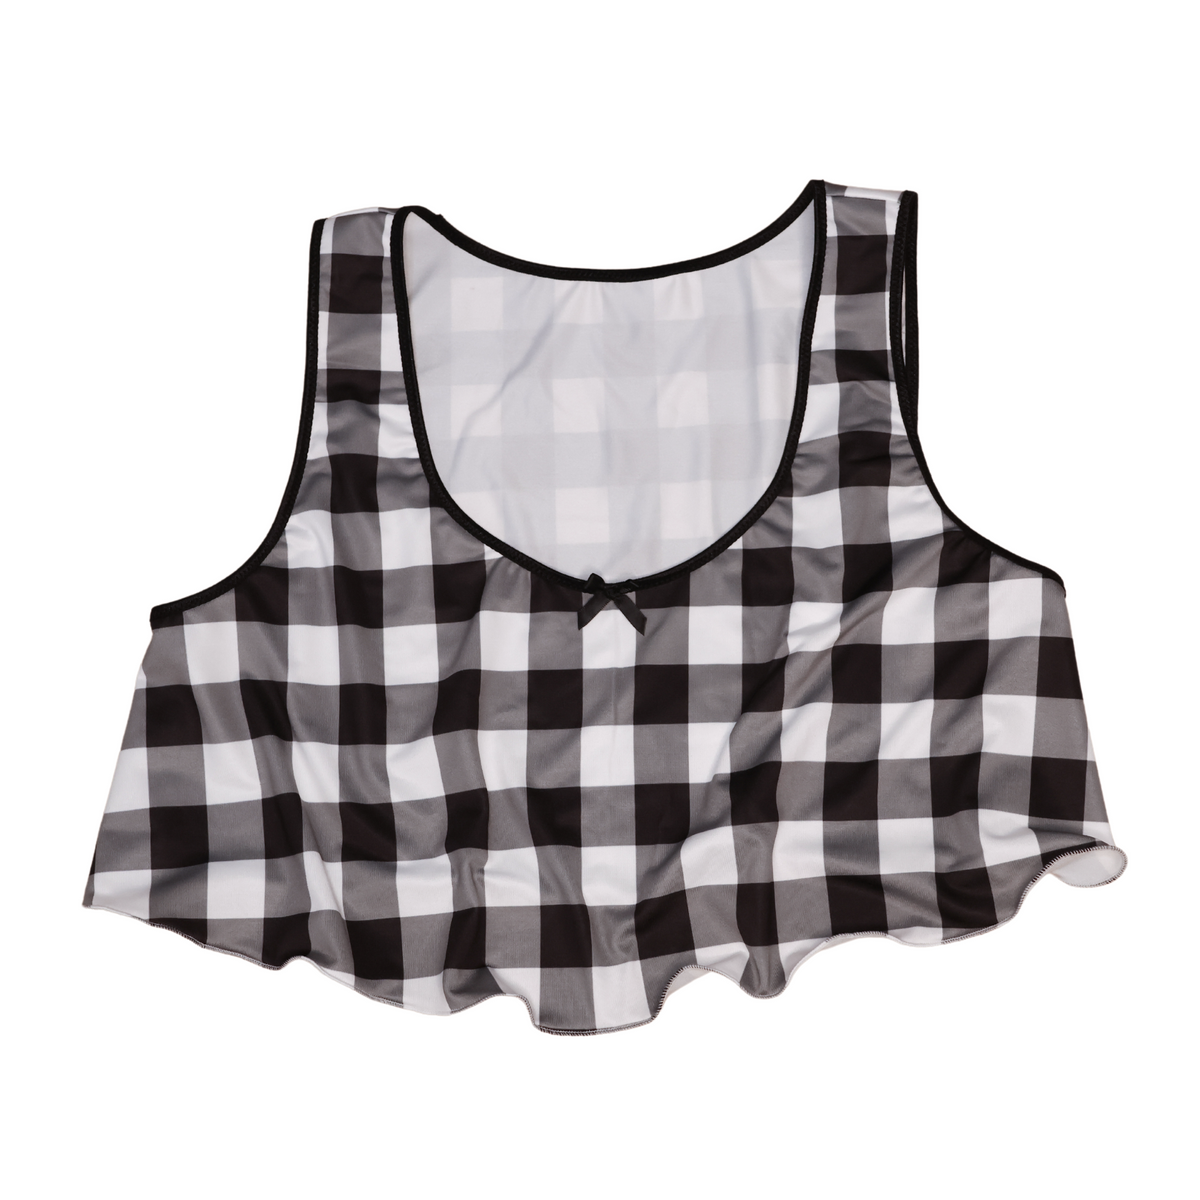 Cropped Camisole - Black Gingham